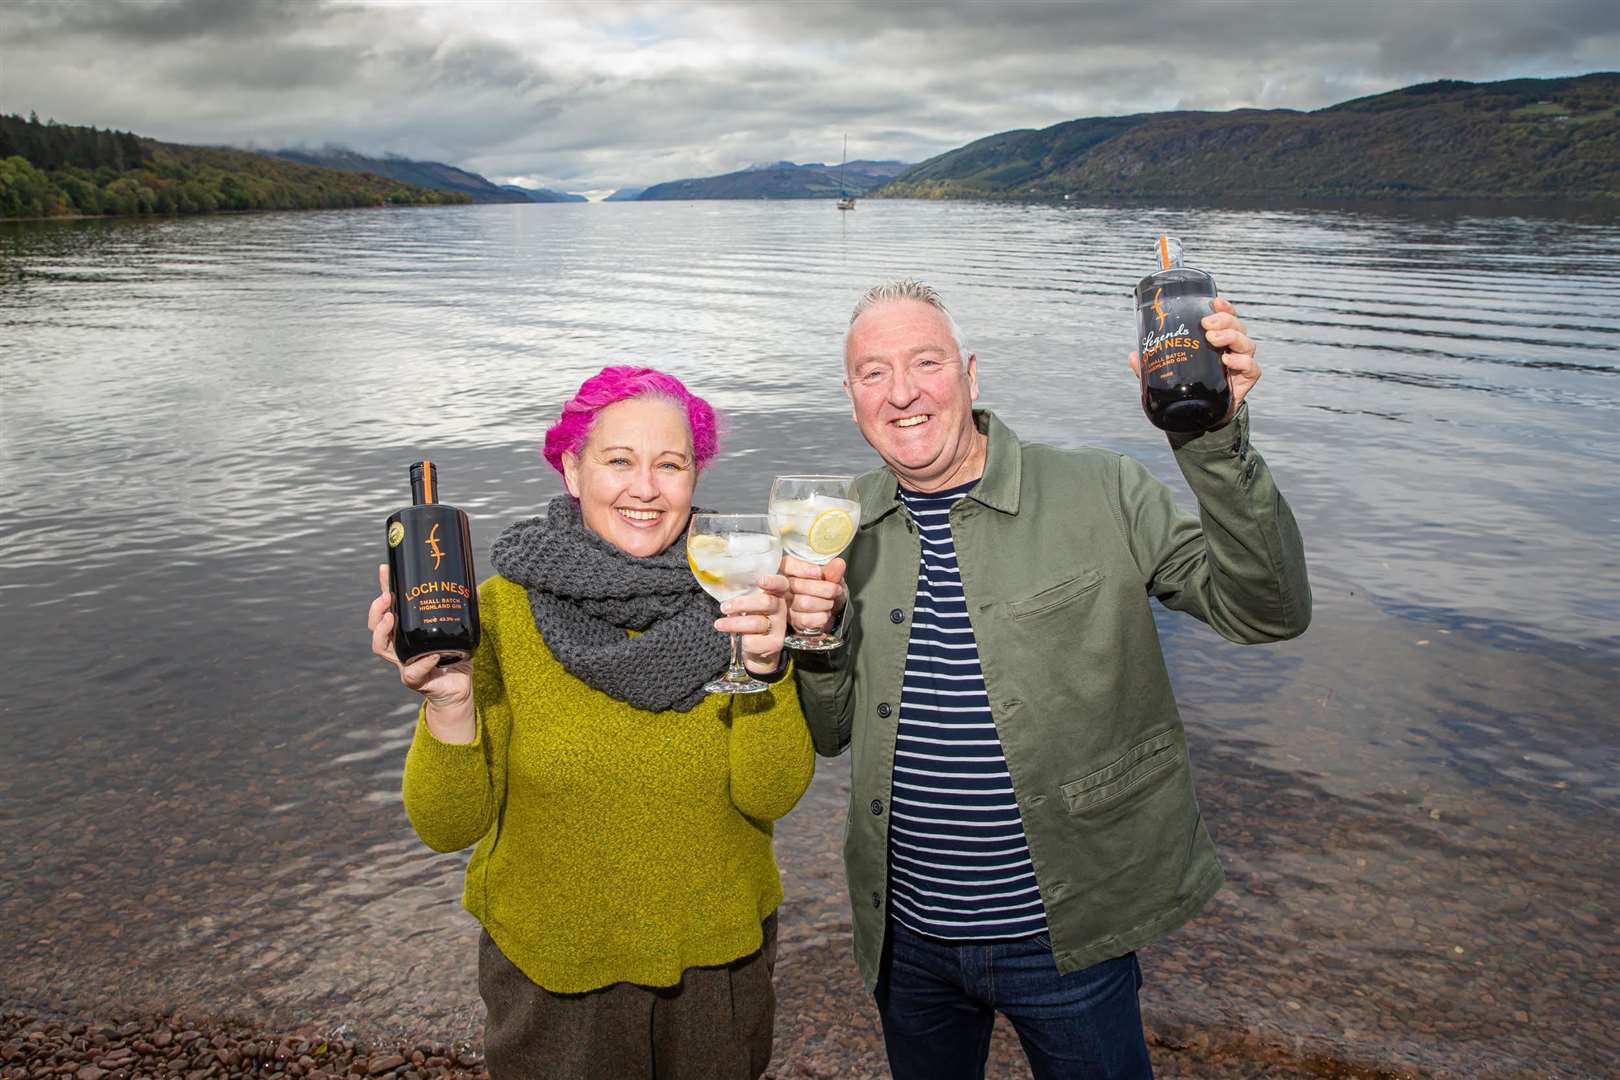 Keeping It RealKevin and Lorien Cameron-Ross, owners and founders of Loch Ness Spirits at Dores, Loch Ness.